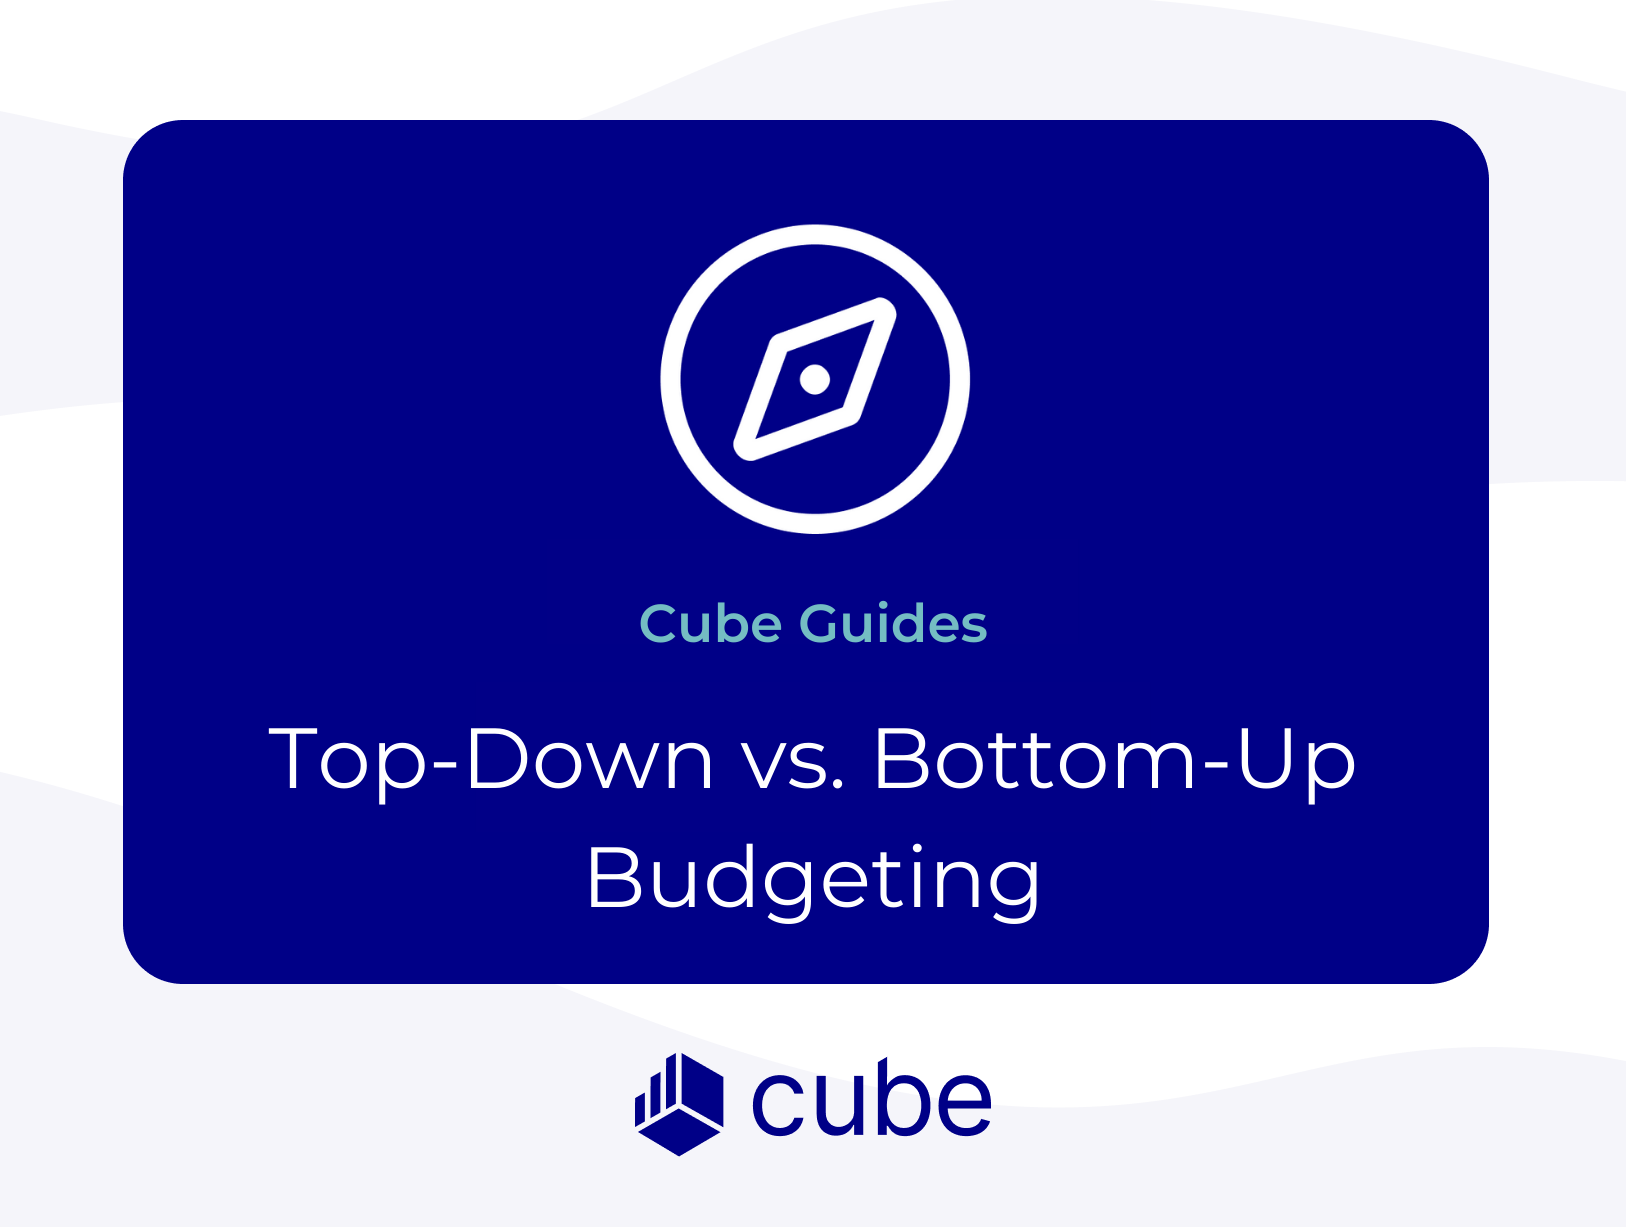 Top-Down or Bottom-Up Budgeting: Which Should You Use?